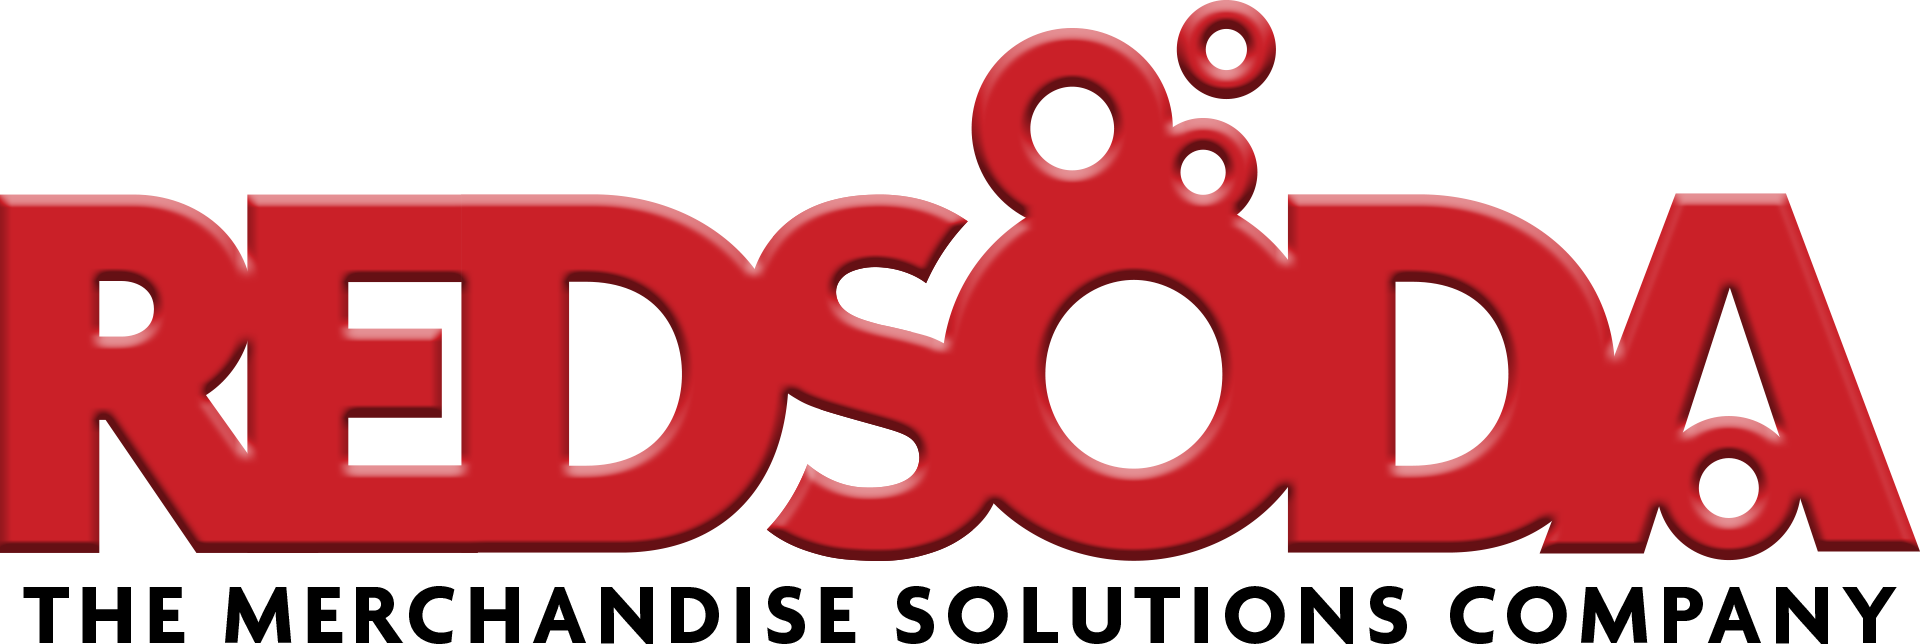 RedSodaCo Limited